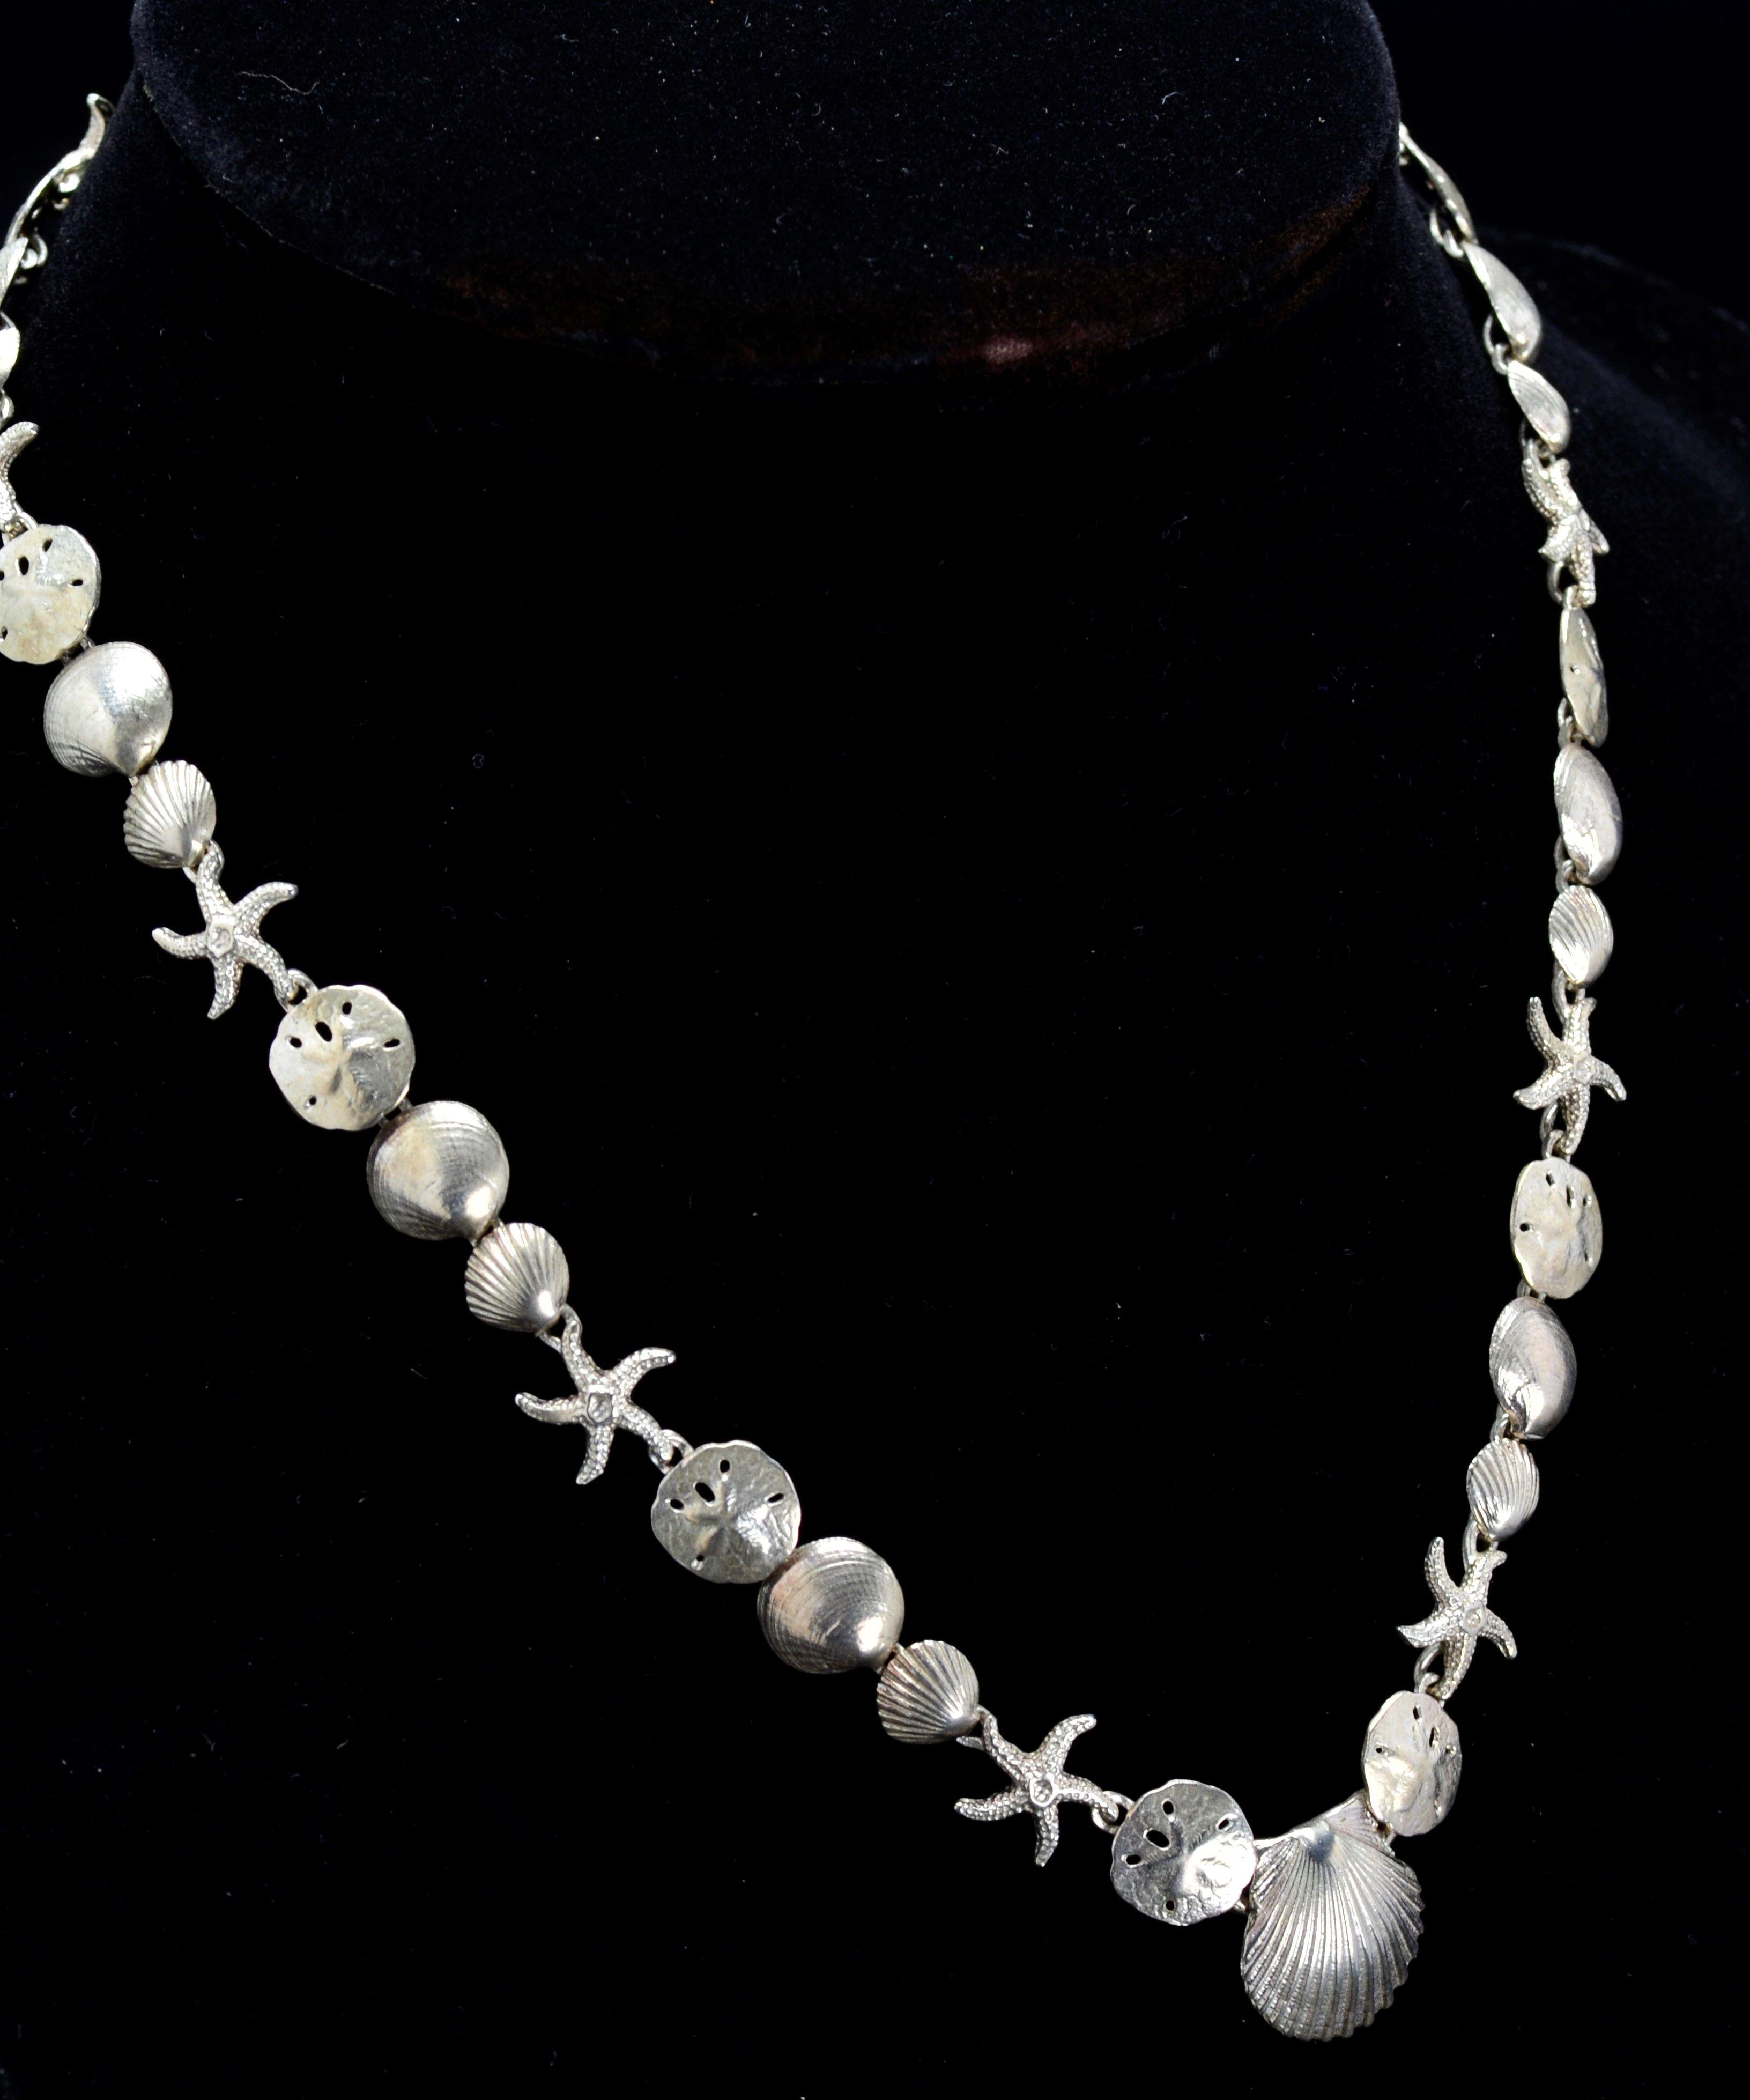 ITEM 7: STERLING SILVER MARINE LIFE NECKLACE